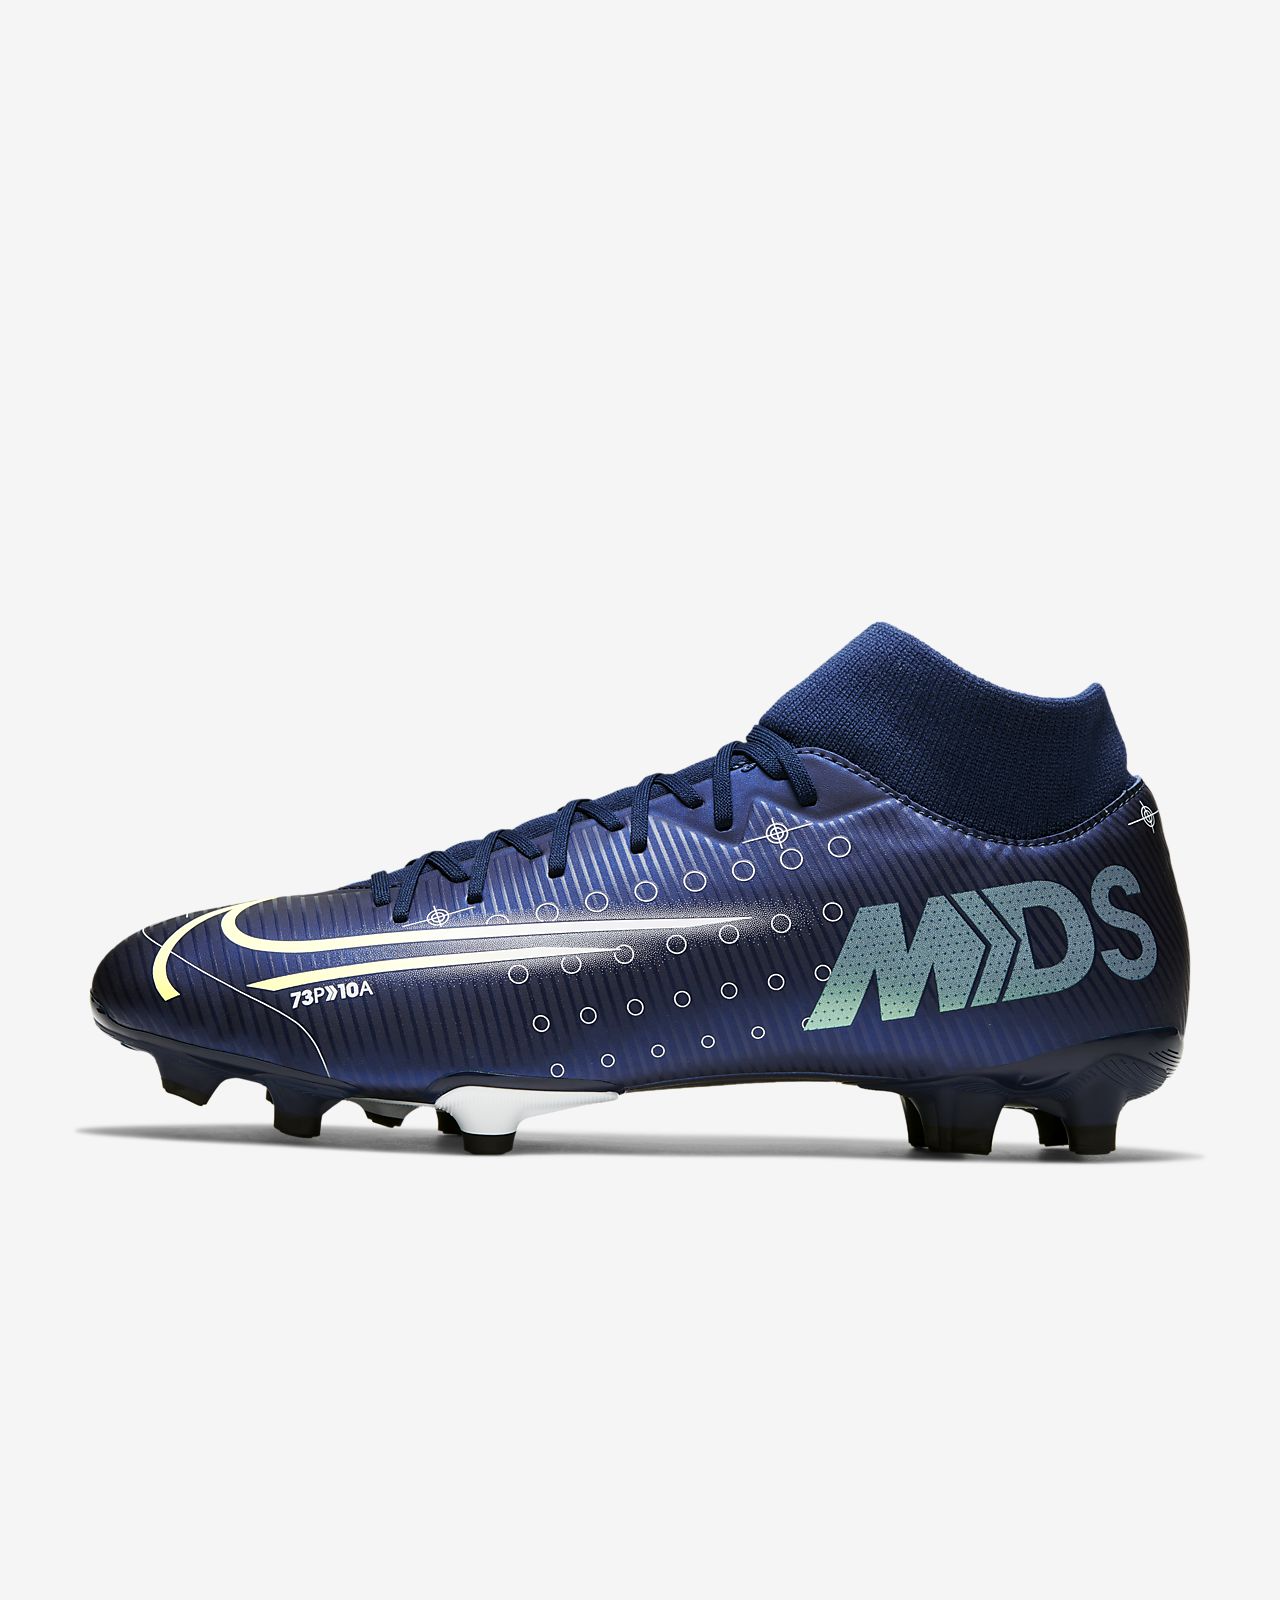 Cheap Nike Mercurial Superfly 360 Heritage 2002 for $119.00